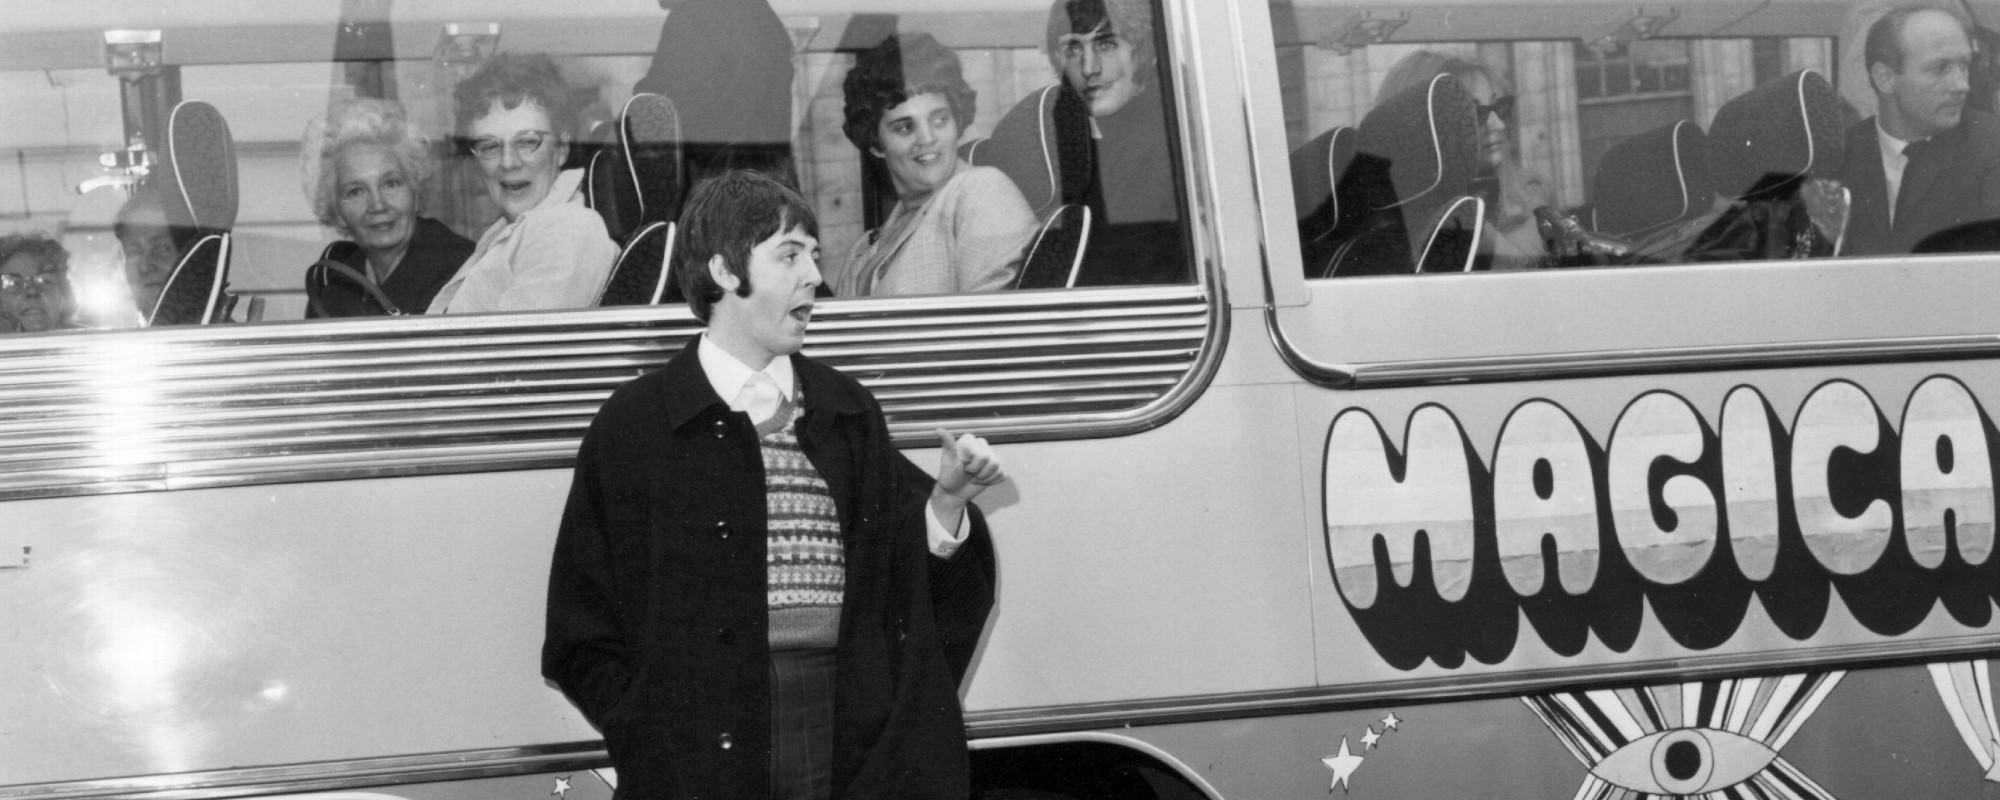 The Meaning Behind “Magical Mystery Tour” by The Beatles and the Subtext Running Just Beneath the Surface